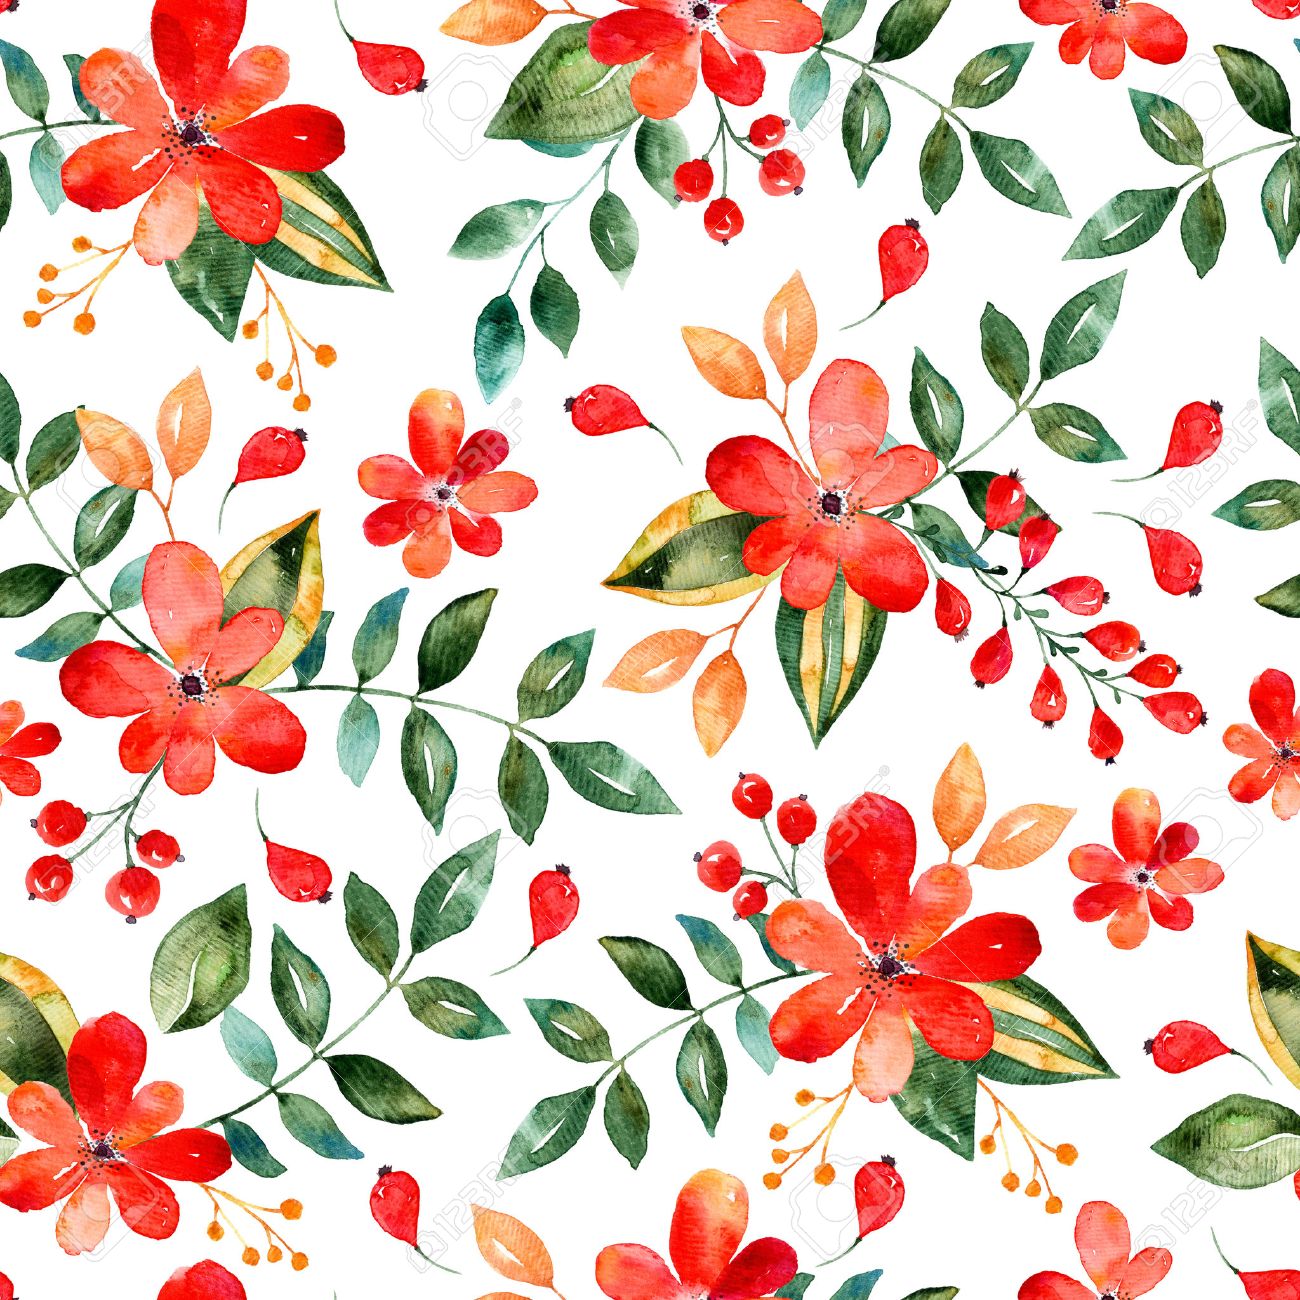 Watercolor Floral Seamless Pattern With Red Flowers And Leafs